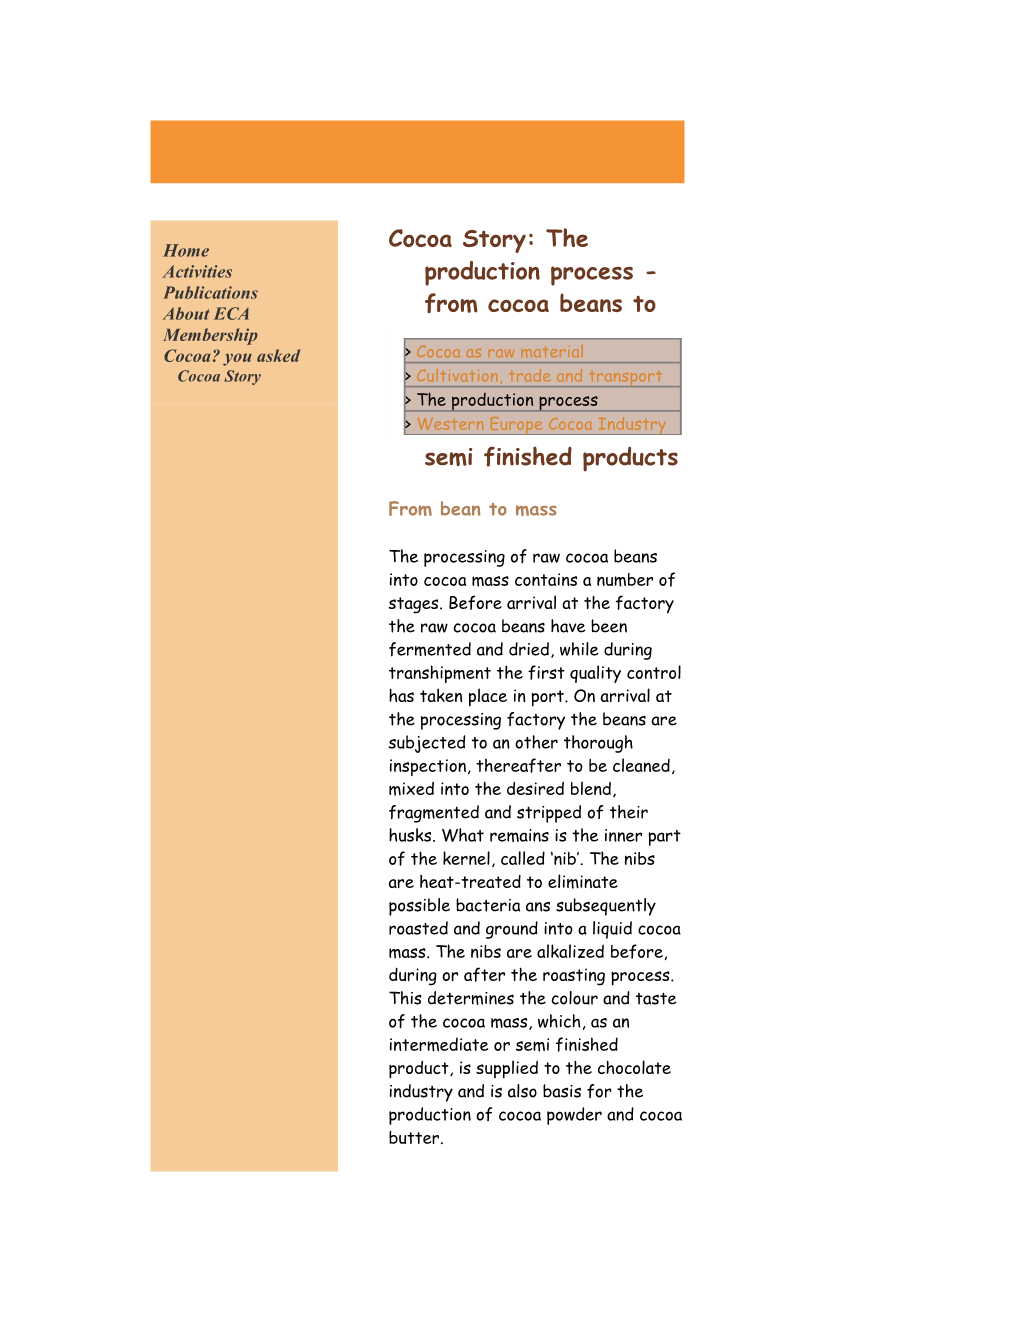 Cocoa Story: the Production Process - from Cocoa Beans to Semi Finished Products